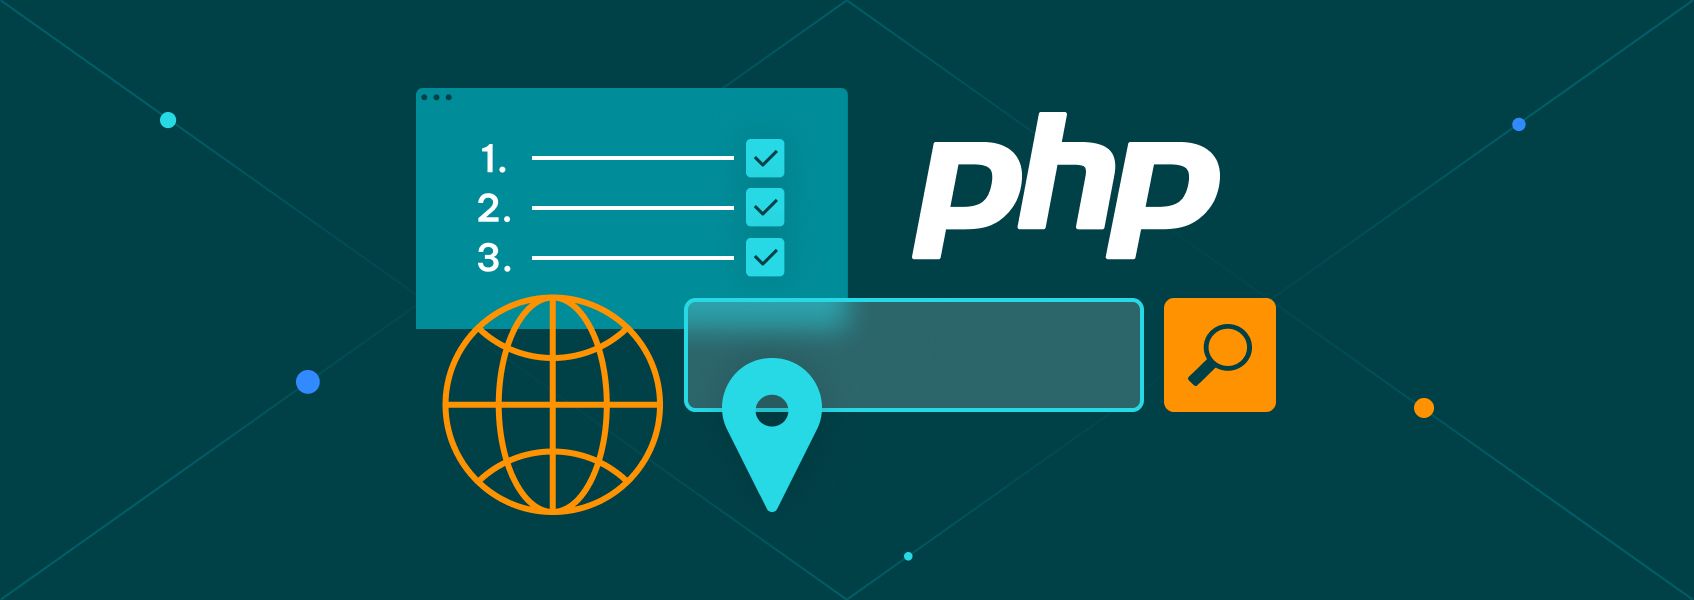 Web Scraping With PHP and Proxies in 3 Steps